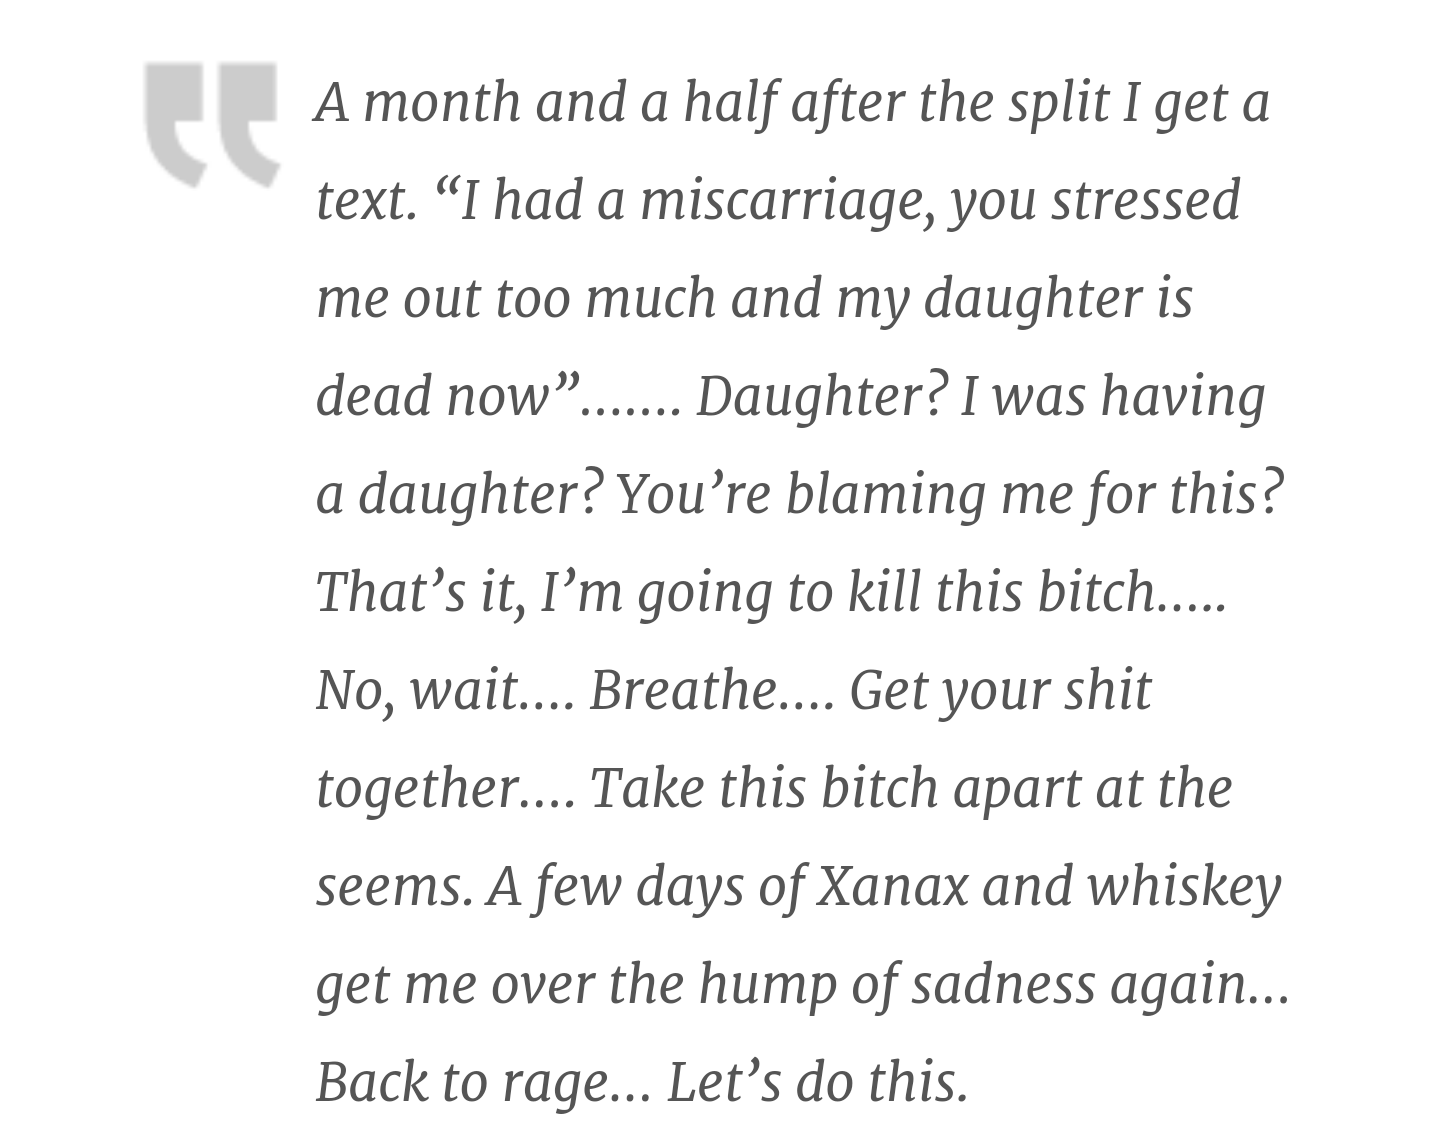 document - A month and a half after the split I get a text. I had a miscarriage, you stressed me out too much and my daughter is dead now....... Daughter? I was having a daughter? You're blaming me for this? That's it, I'm going to kill this bitch..... No